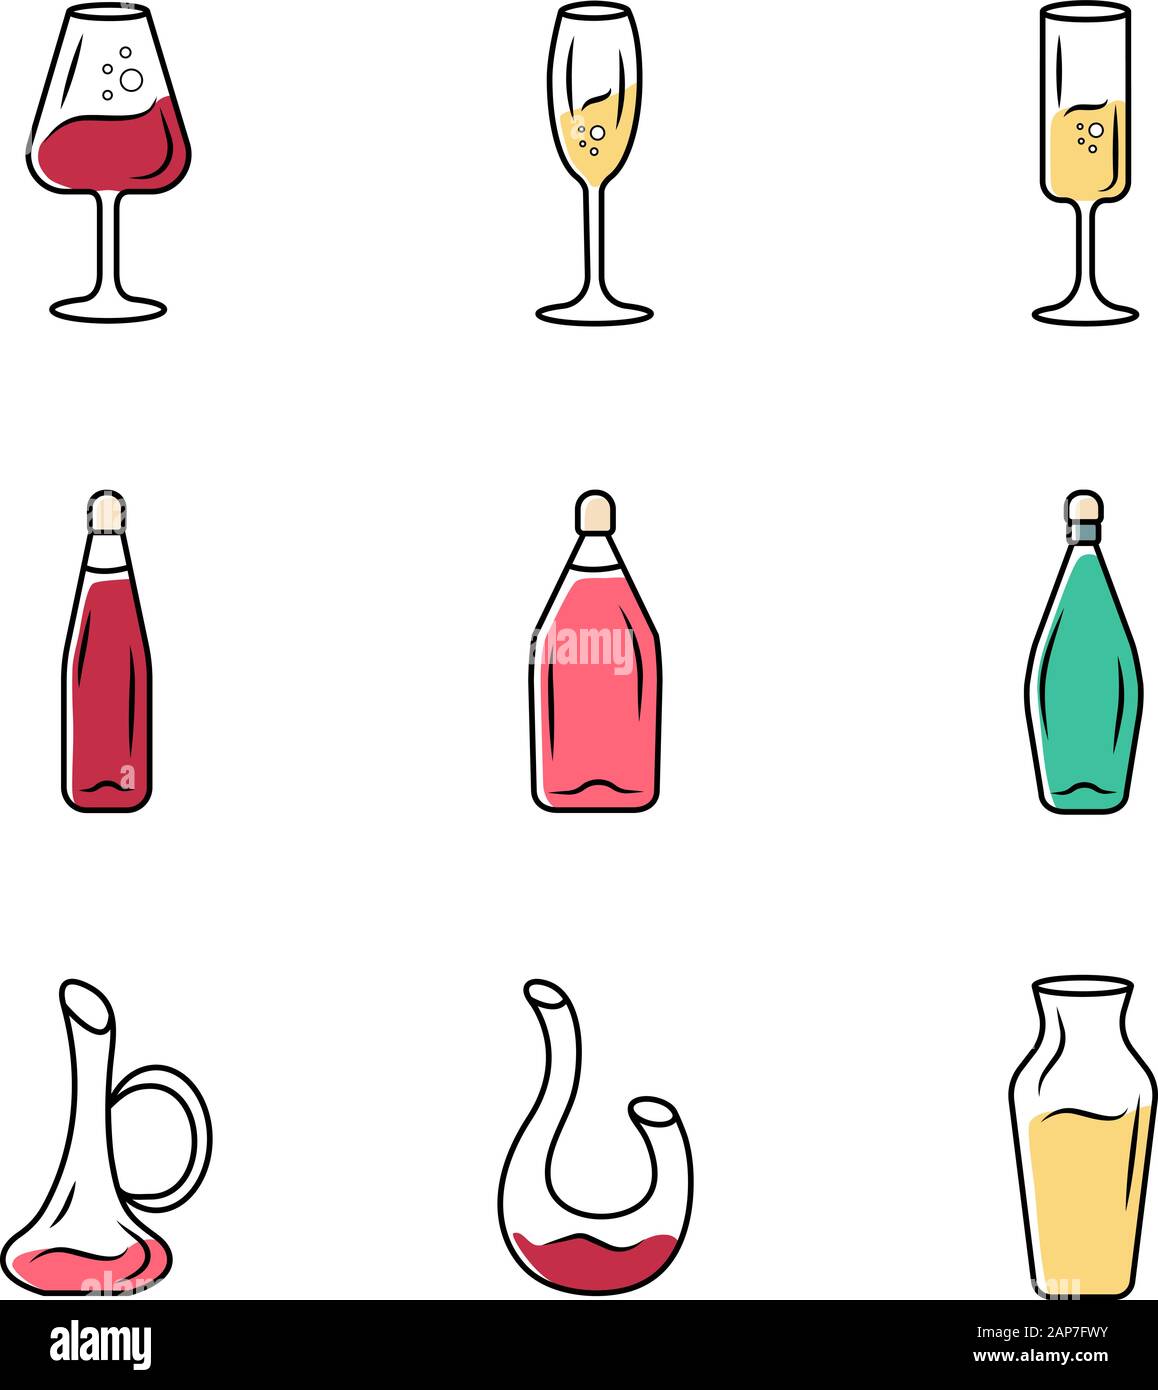 Winery glassware icons set. Different types of wine. Decanters, bottles, glasses. Aperitif drinks, cocktails, alcohol beverages. Party, bar, restauran Stock Vector